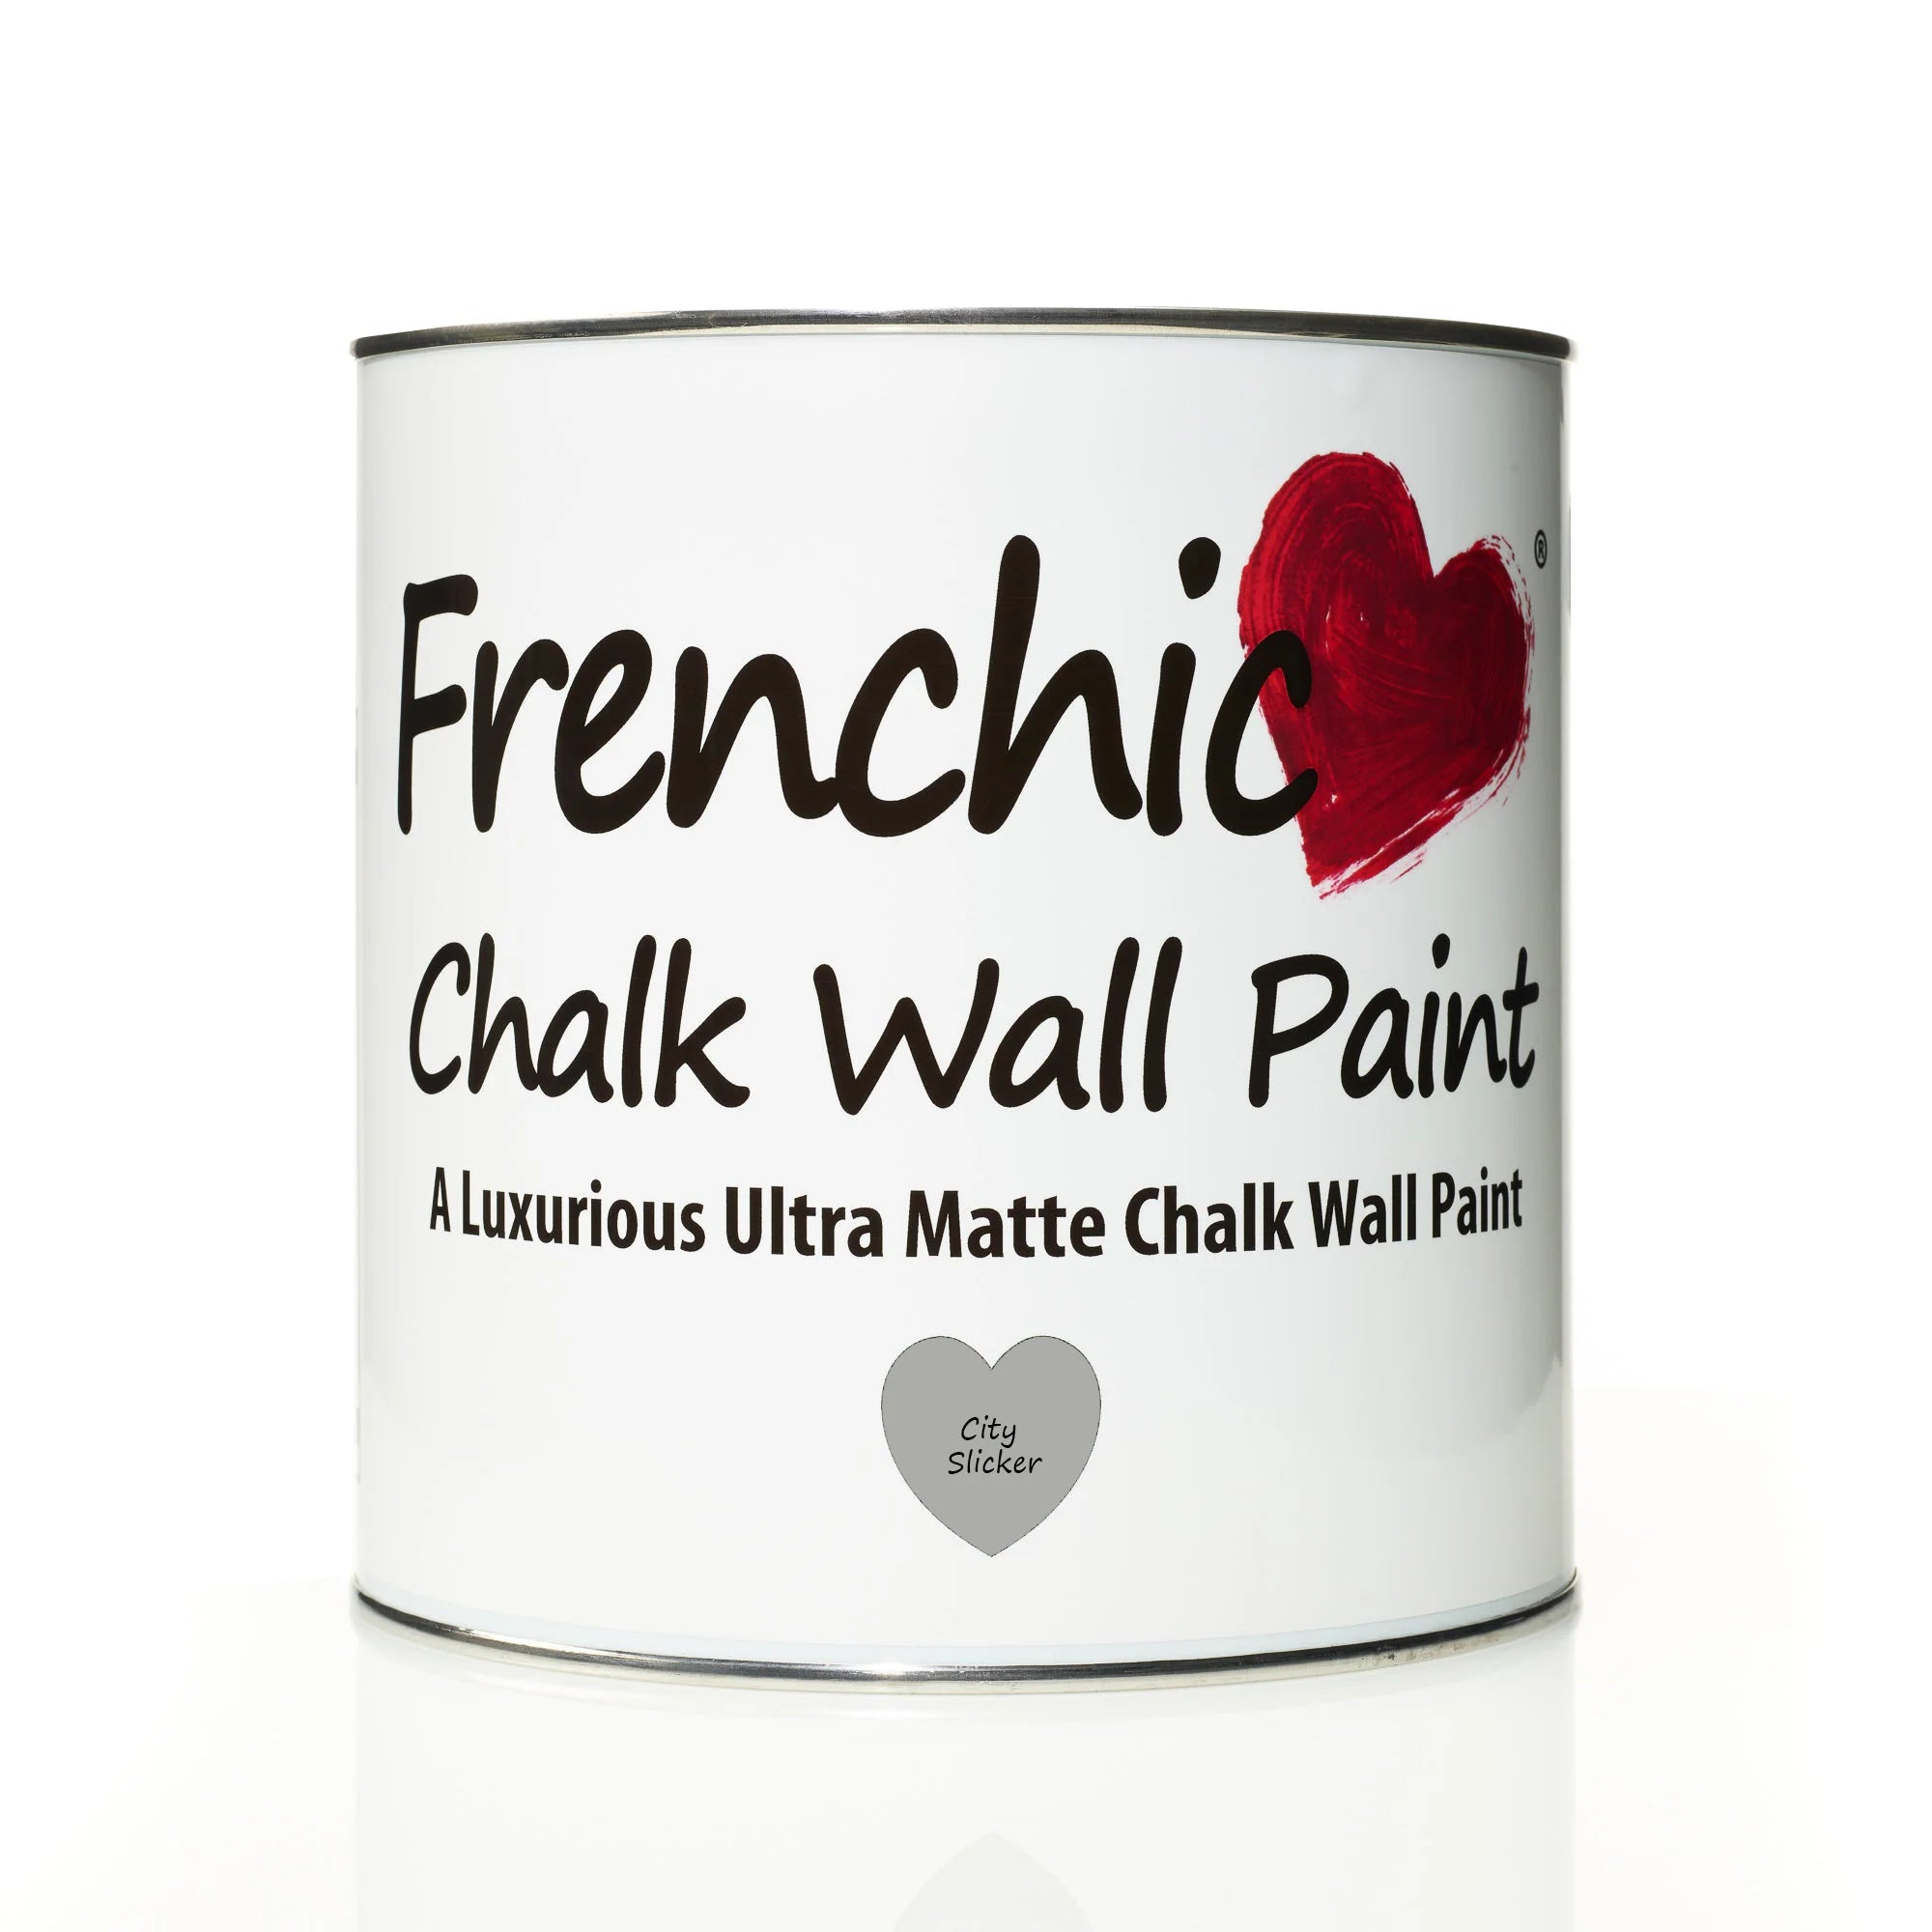 Frenchic Paint City Slicker Wall Paint 2.5L Frenchic Paint Chalk Wall Paint Range by Weirs of Baggot Street Irelands Largest and most Trusted Stockist of Frenchic Paint. Shop online for Nationwide and Same Day Dublin Delivery